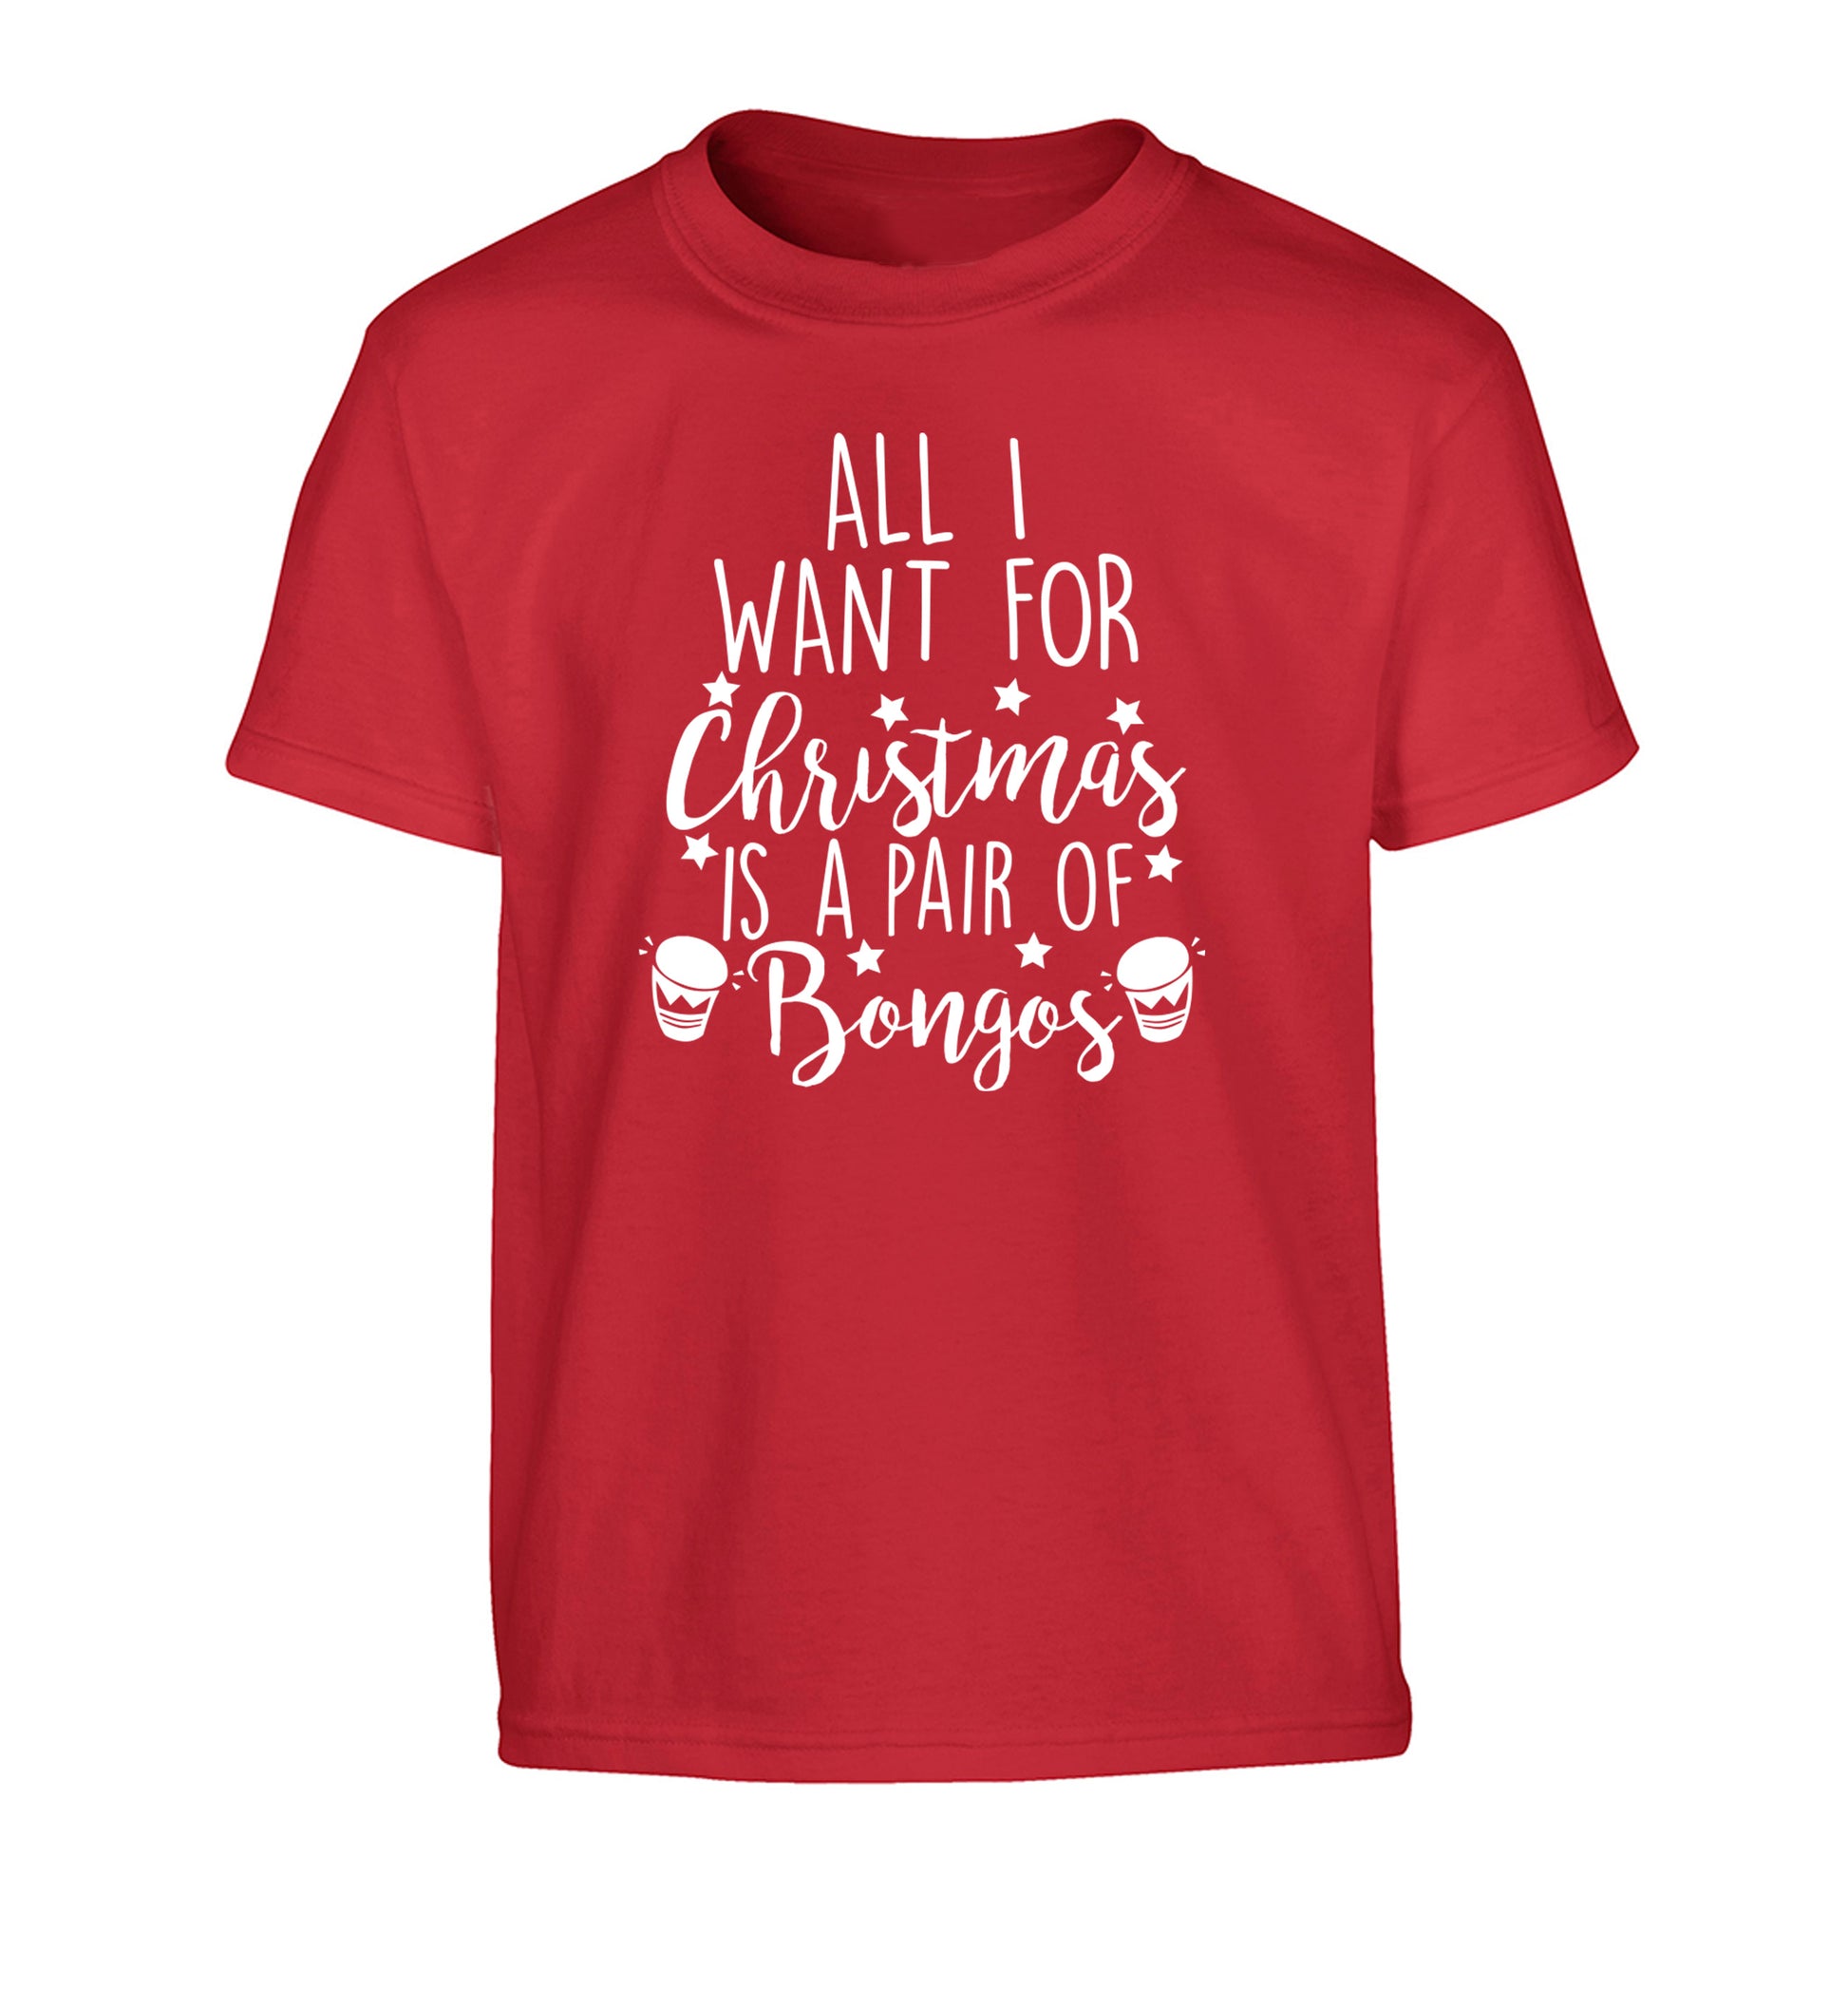 All I want for Christmas is a pair of bongos! Children's red Tshirt 12-14 Years